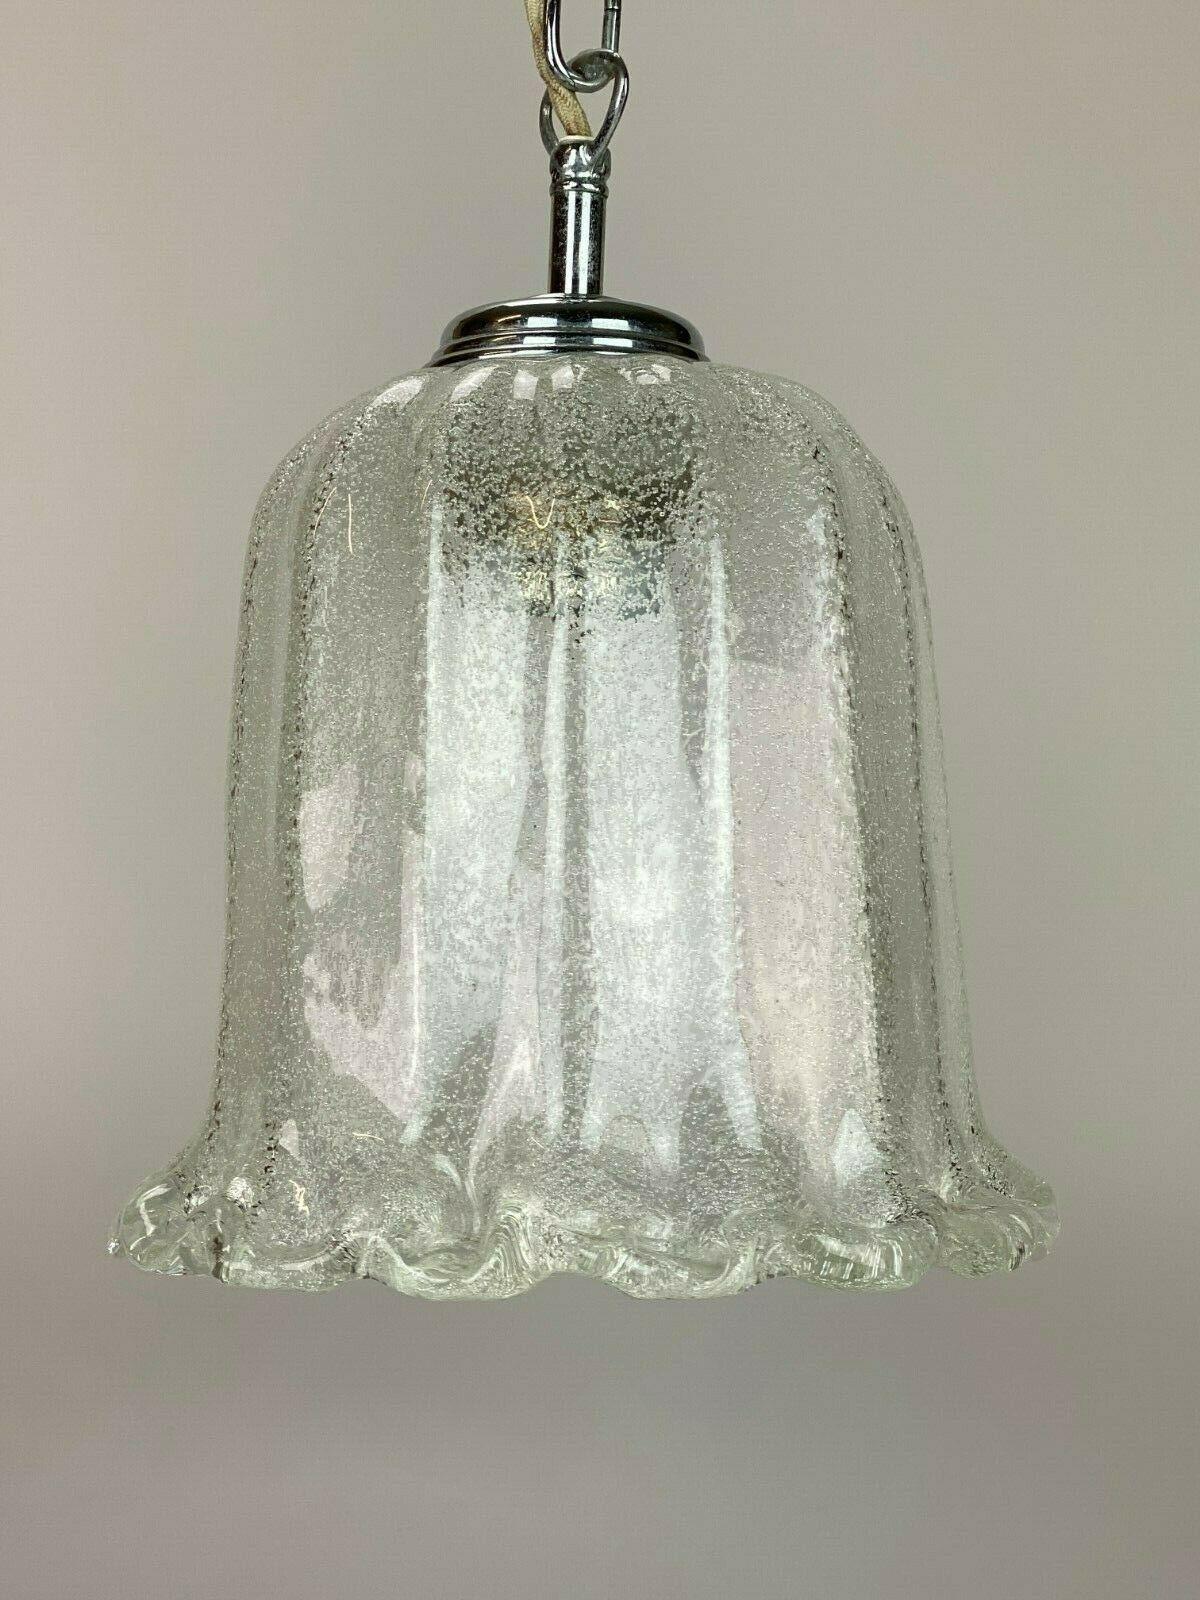 60s 70s lamp hanging lamp ball lamp bubble chrome glass space age design

Object: ceiling lamp

Manufacturer:

Condition: good

Age: around 1960-1970

Dimensions:

Diameter = 21.5cm
Height = 27cm

Other notes:

The pictures serve as